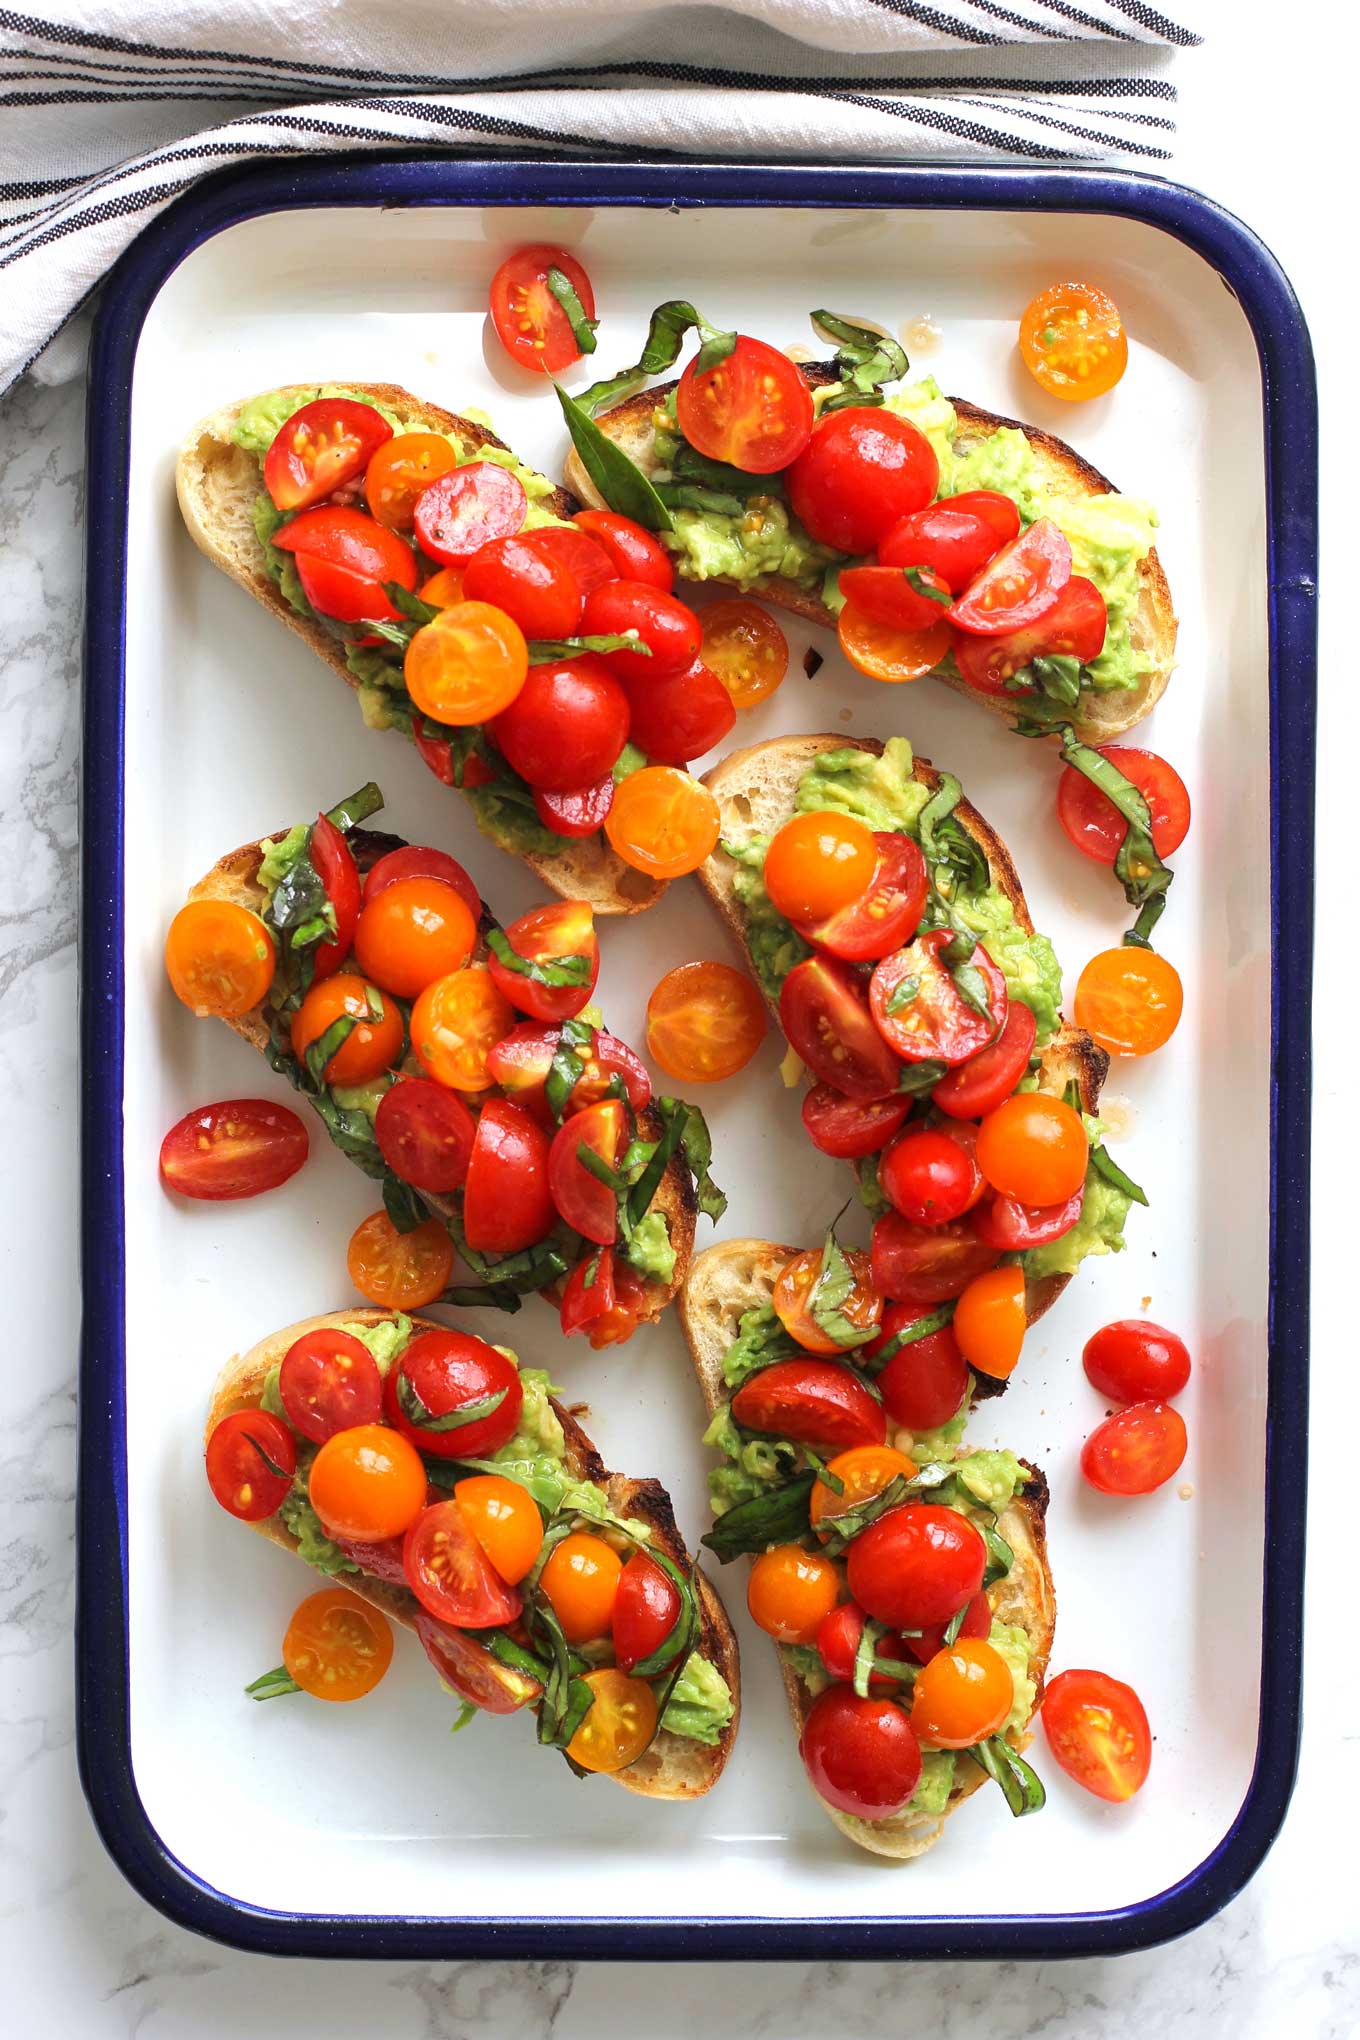 Avocado toast topped with cherry tomatoes on a white pan with a blue edge.